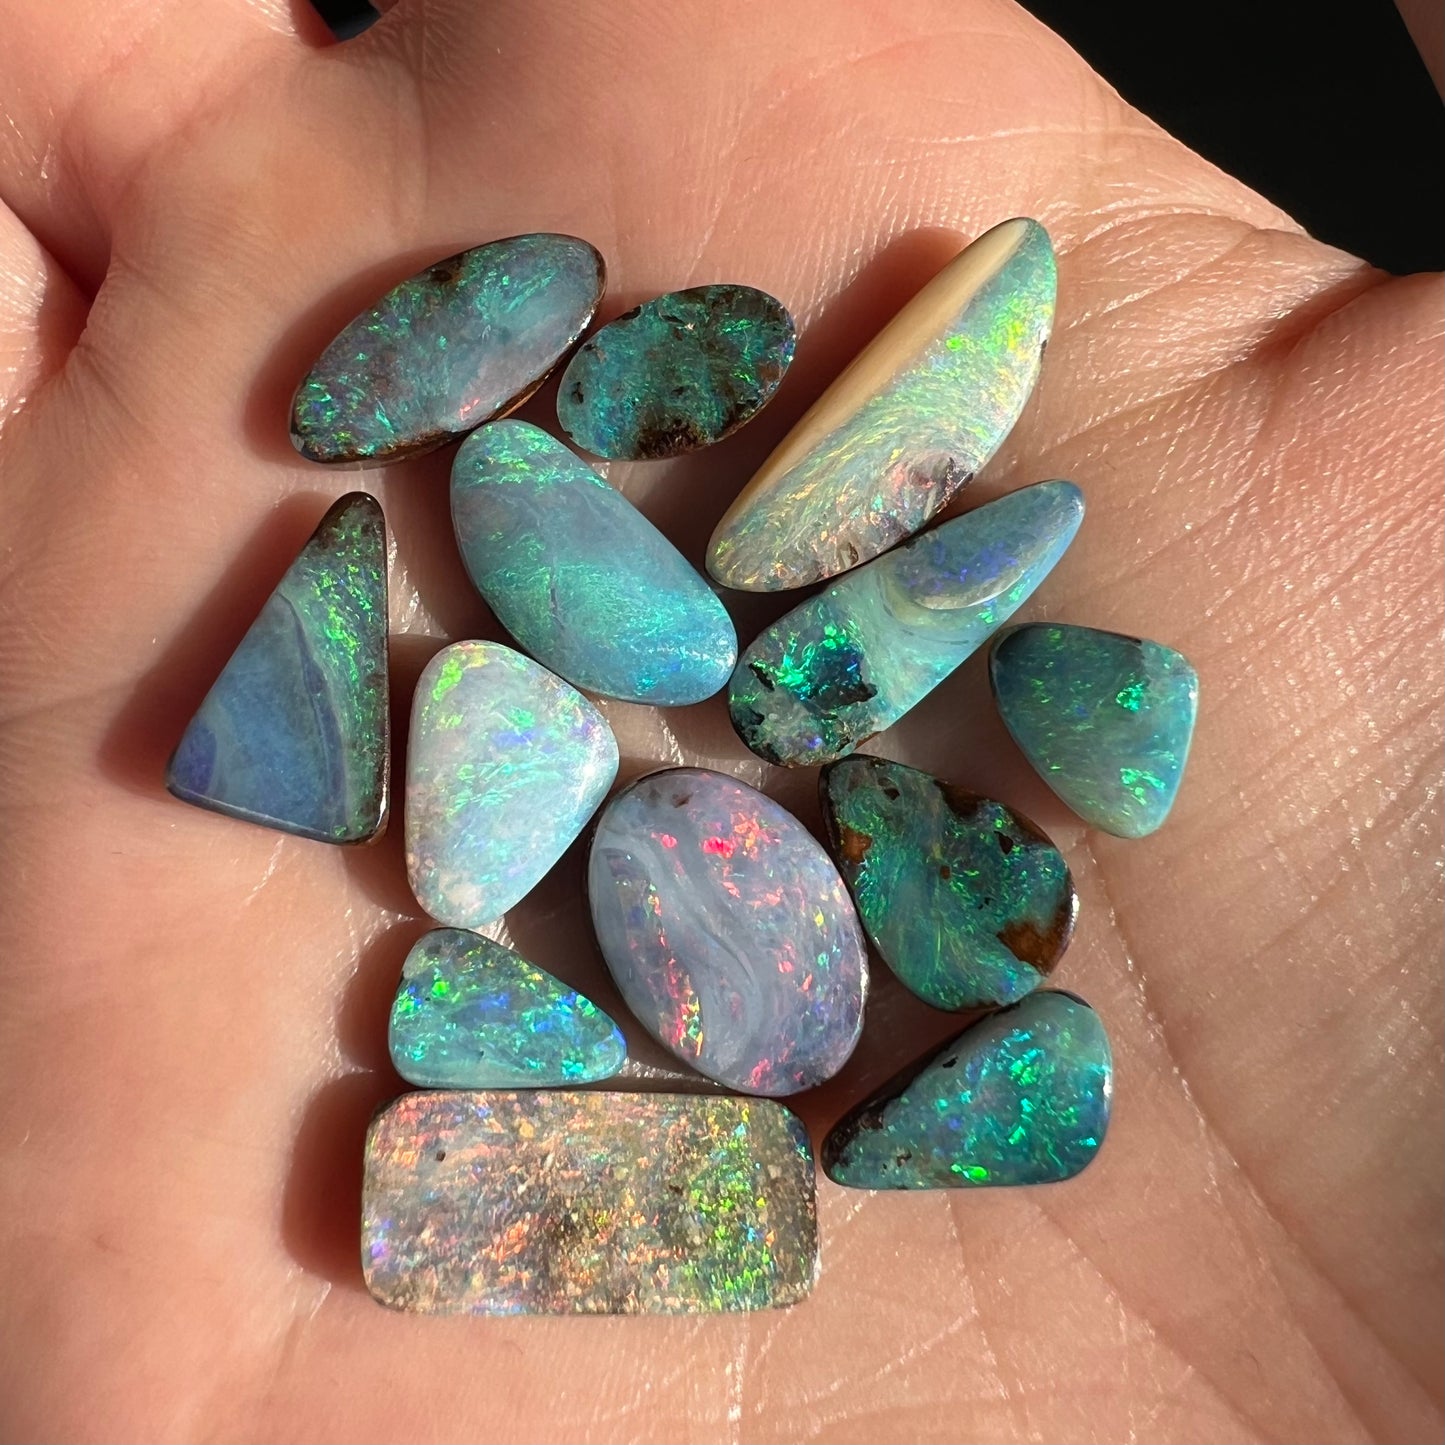 0.83 Ct extra small boulder opal